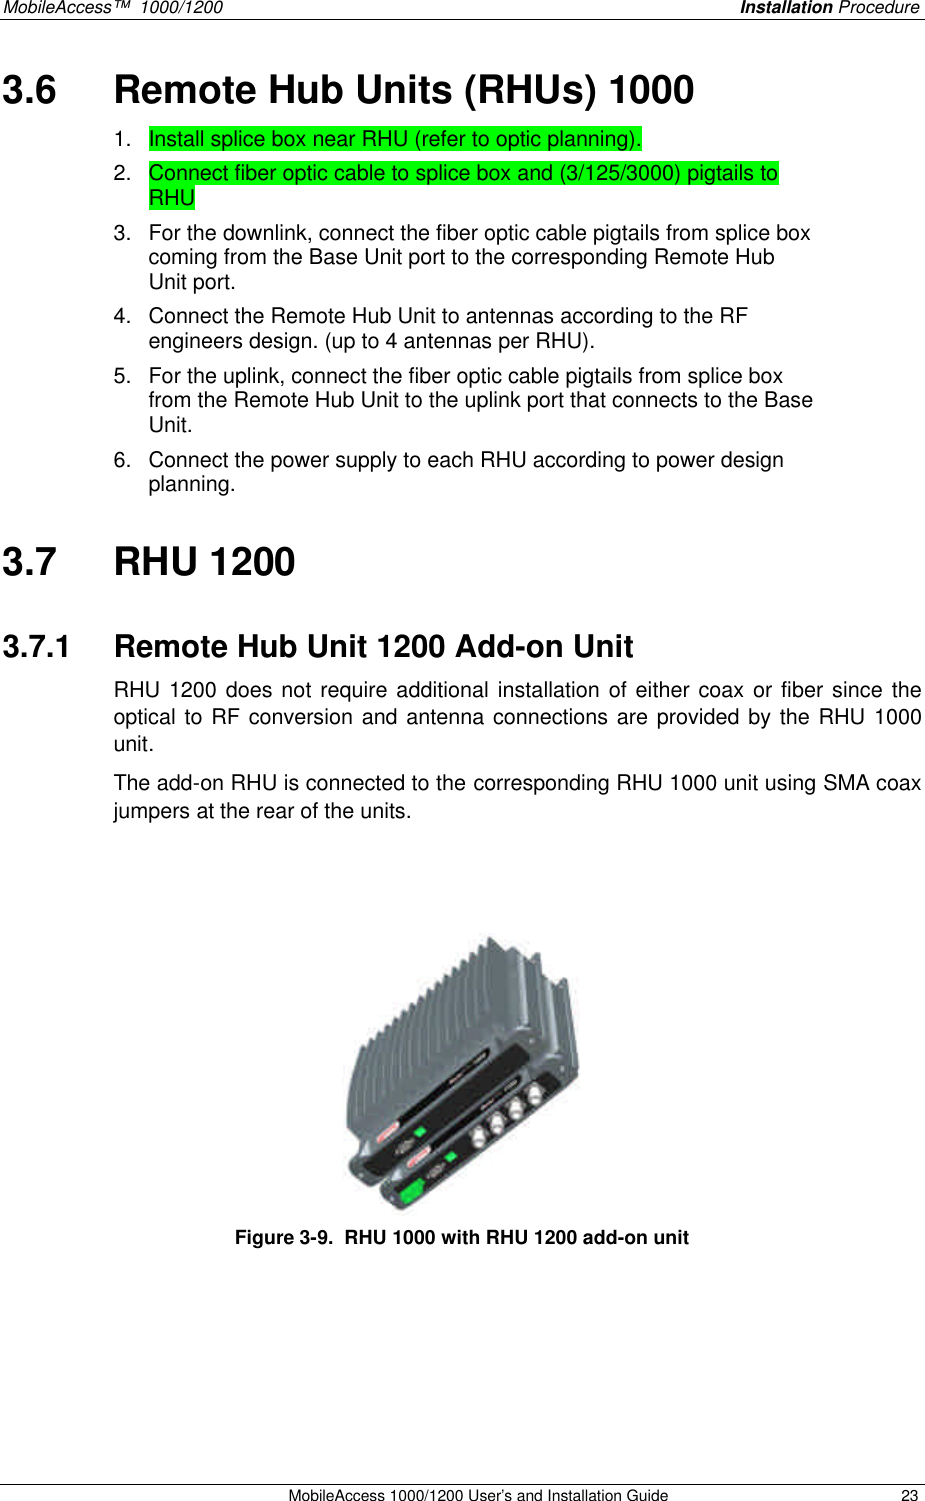 MobileAccess™  1000/1200    Installation Procedure  MobileAccess 1000/1200 User’s and Installation Guide 23 3.6  Remote Hub Units (RHUs) 1000 1. Install splice box near RHU (refer to optic planning).  2. Connect fiber optic cable to splice box and (3/125/3000) pigtails to RHU  3. For the downlink, connect the fiber optic cable pigtails from splice box coming from the Base Unit port to the corresponding Remote Hub Unit port.  4. Connect the Remote Hub Unit to antennas according to the RF engineers design. (up to 4 antennas per RHU).  5. For the uplink, connect the fiber optic cable pigtails from splice box from the Remote Hub Unit to the uplink port that connects to the Base Unit.  6. Connect the power supply to each RHU according to power design planning.  3.7  RHU 1200 3.7.1  Remote Hub Unit 1200 Add-on Unit RHU 1200 does not require additional installation of either coax or fiber since the optical to RF conversion and antenna connections are provided by the RHU 1000 unit.   The add-on RHU is connected to the corresponding RHU 1000 unit using SMA coax jumpers at the rear of the units.     Figure 3-9.  RHU 1000 with RHU 1200 add-on unit 